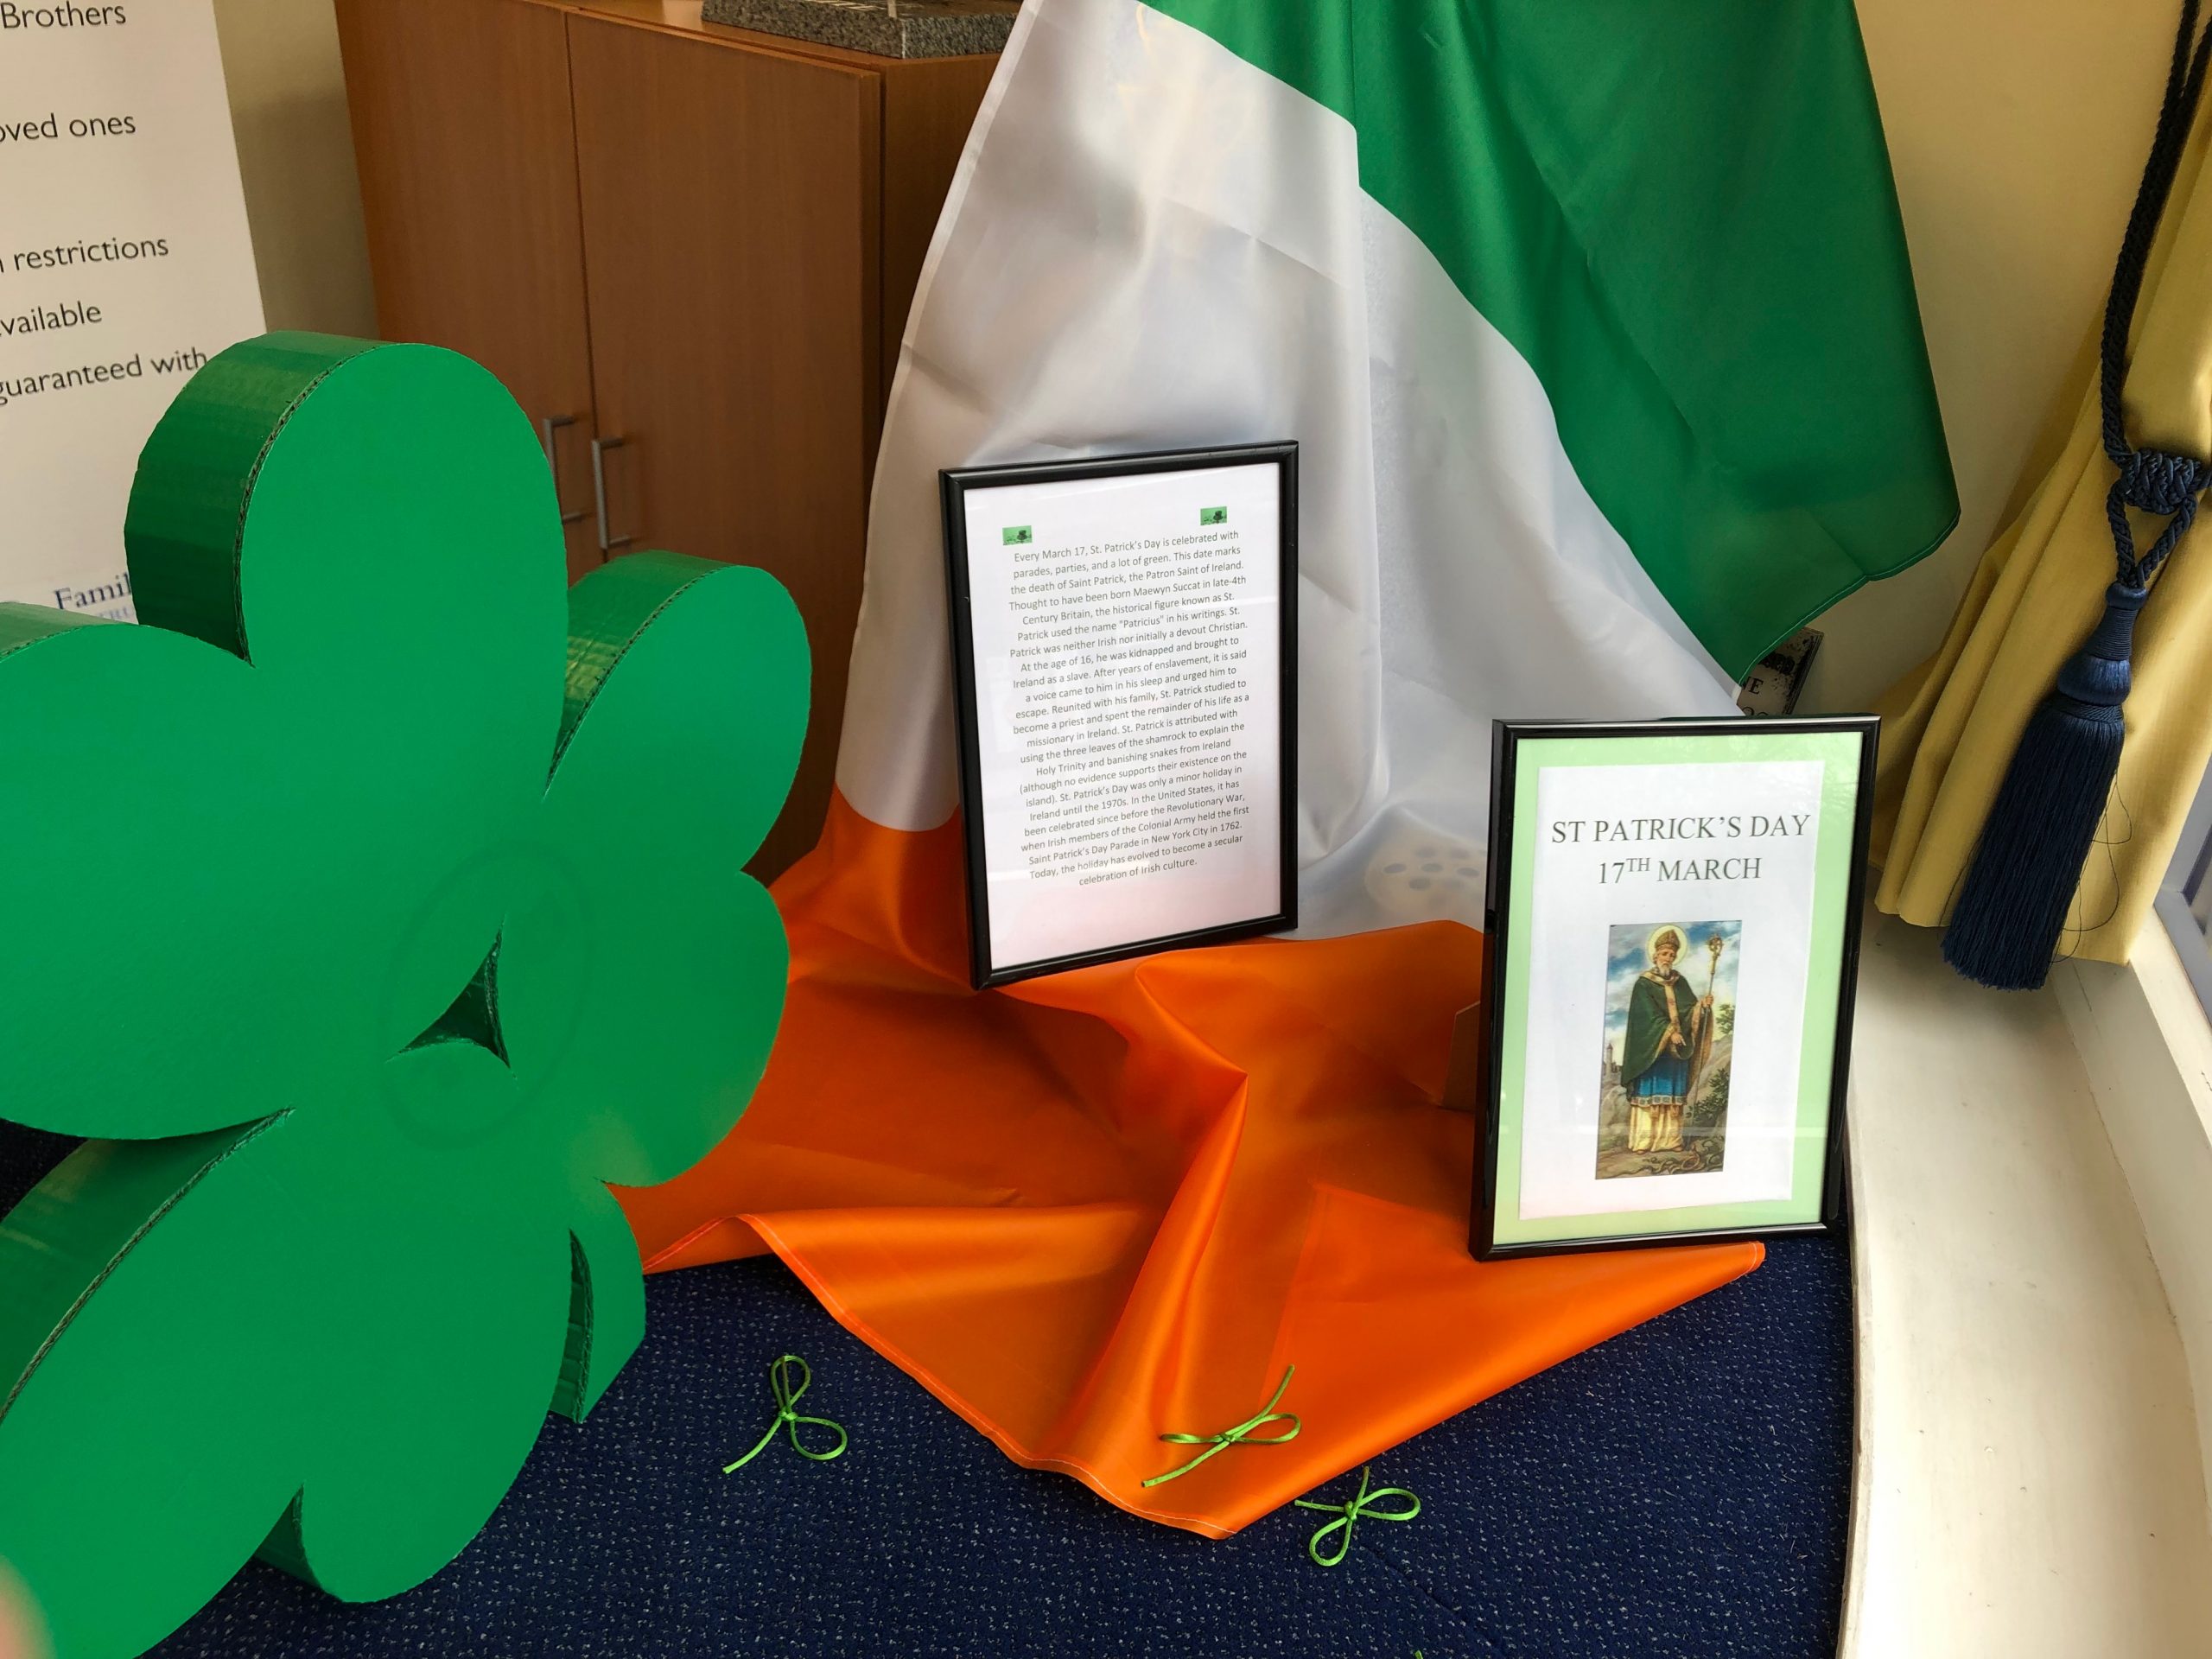 St Patrick’s Day Poem from Lodge Brothers & Keates